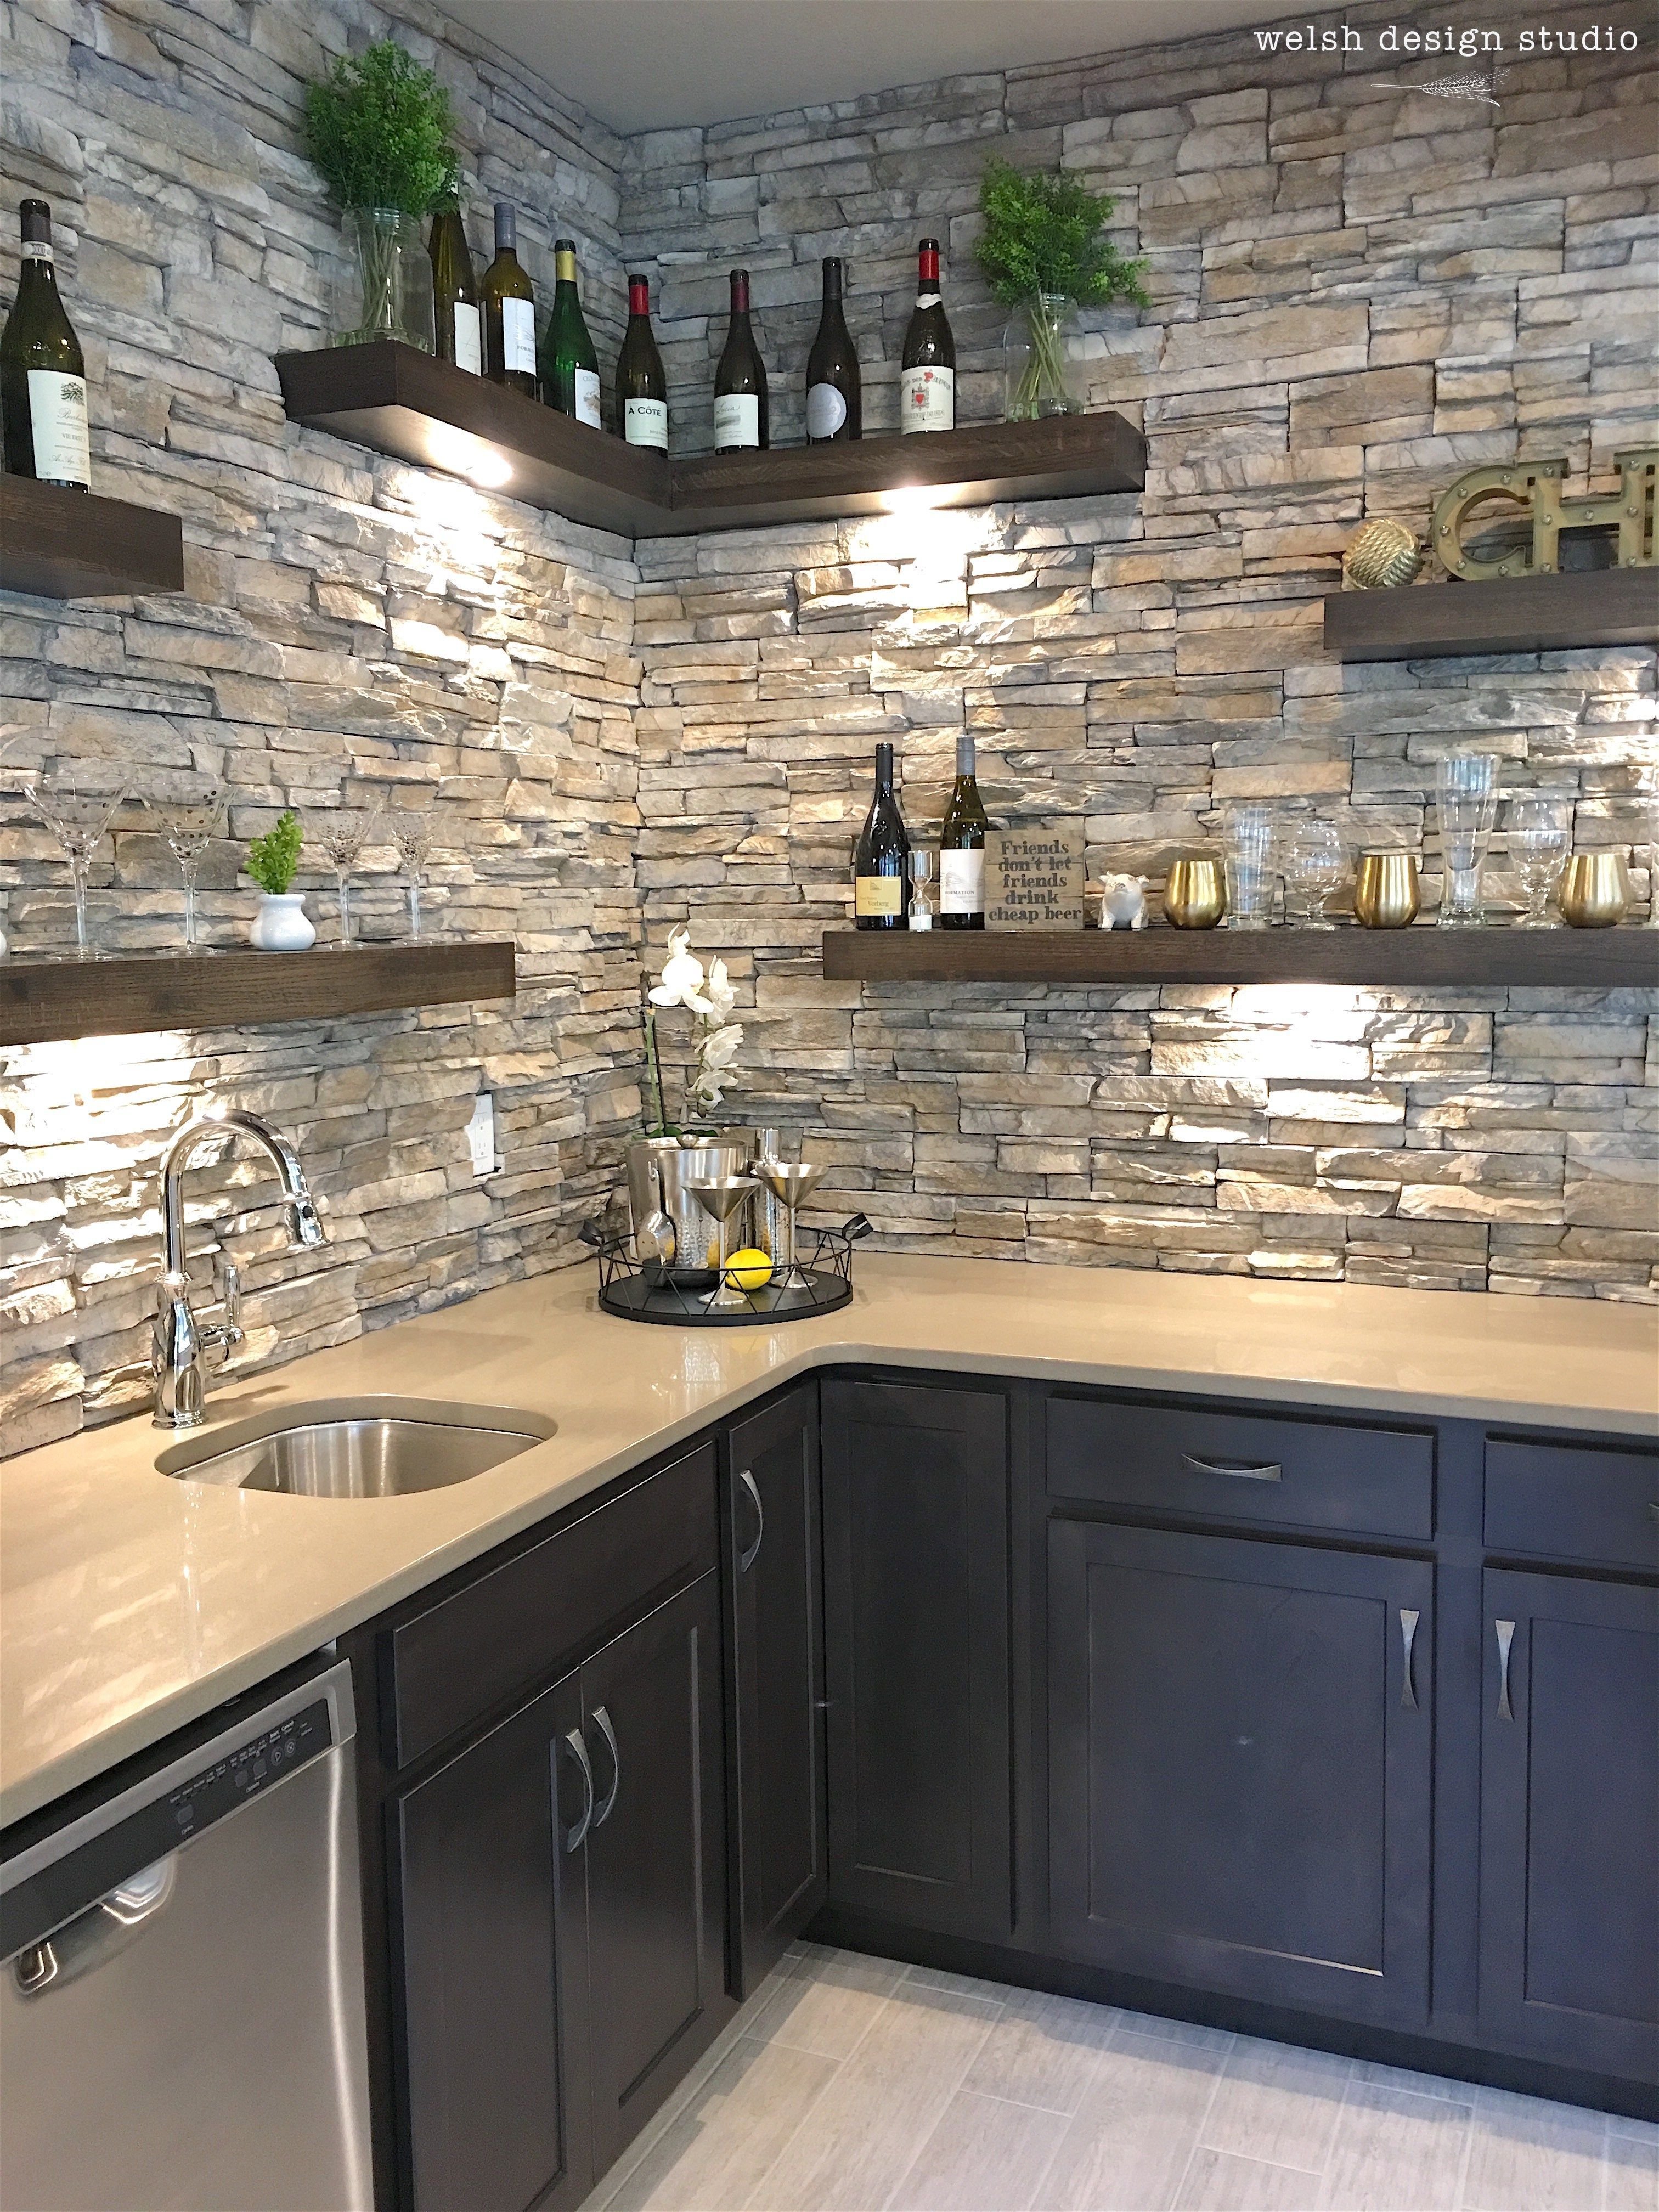 How to Decorate a Stunning Grey Stone Backsplash: Create a Unique Home Decor Look